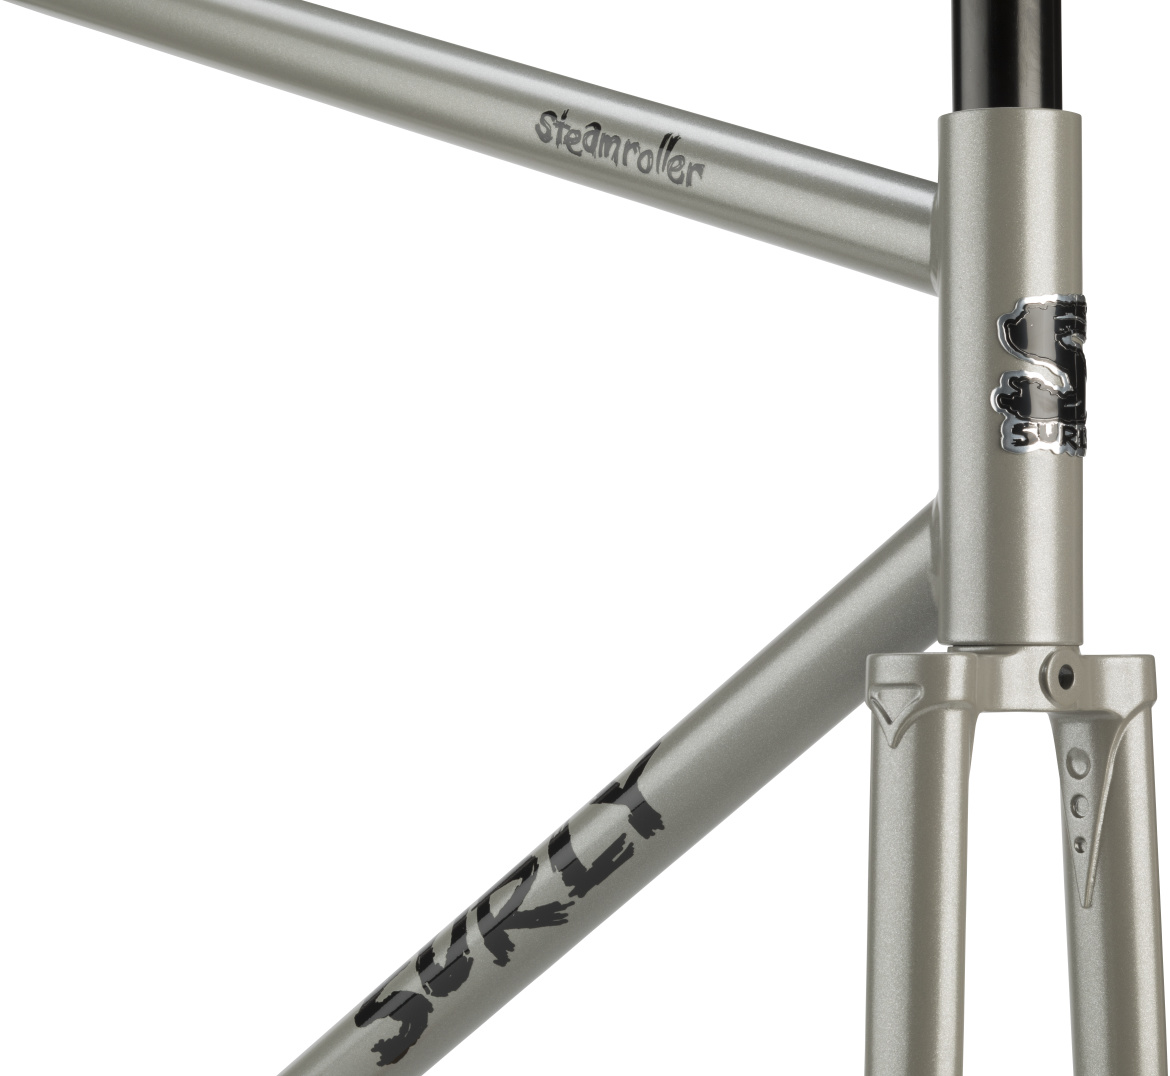 Partial front view of a Surly Steamroller bike frame and fork - Ministry Gray color